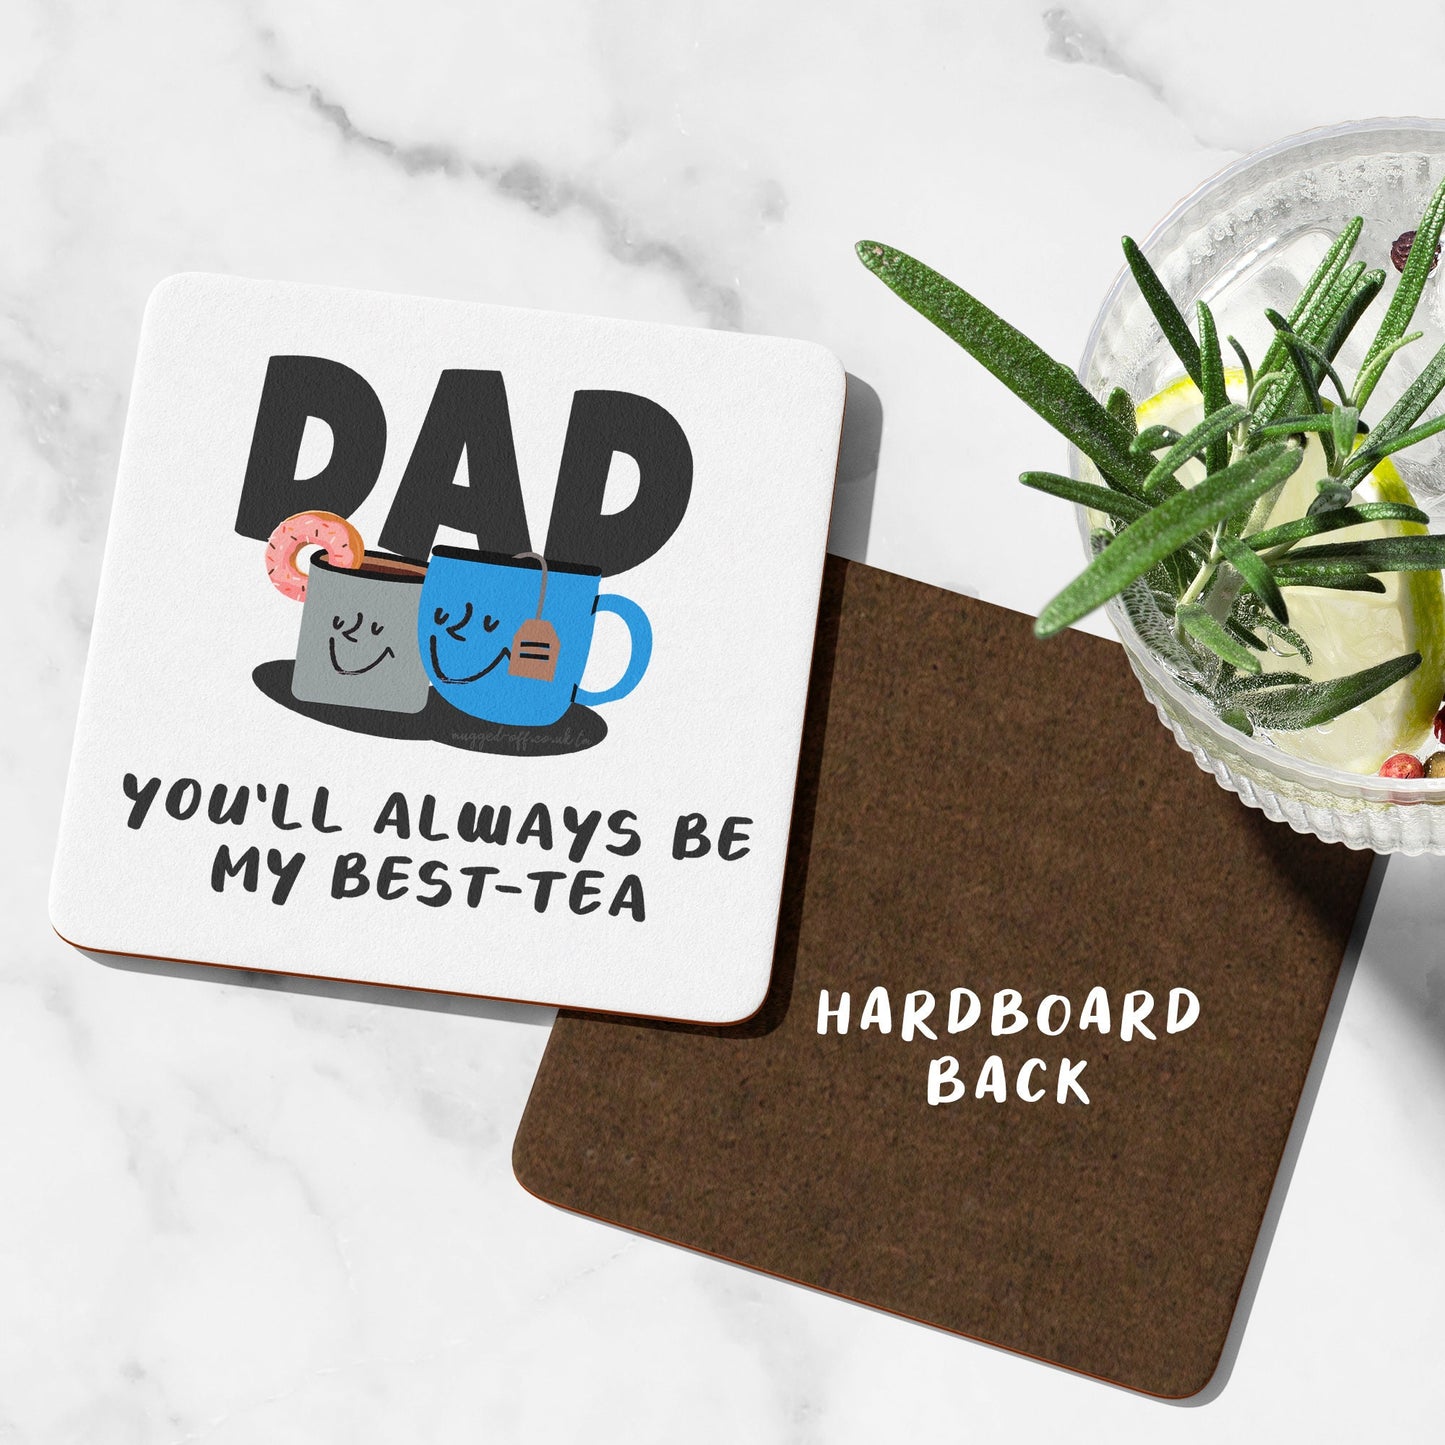 Dad Coaster, Funny Dad Birthday Gift, From Son, Daughter, Funny Best Dad Gift, Dad You'll Always Be My Best-tea Coaster